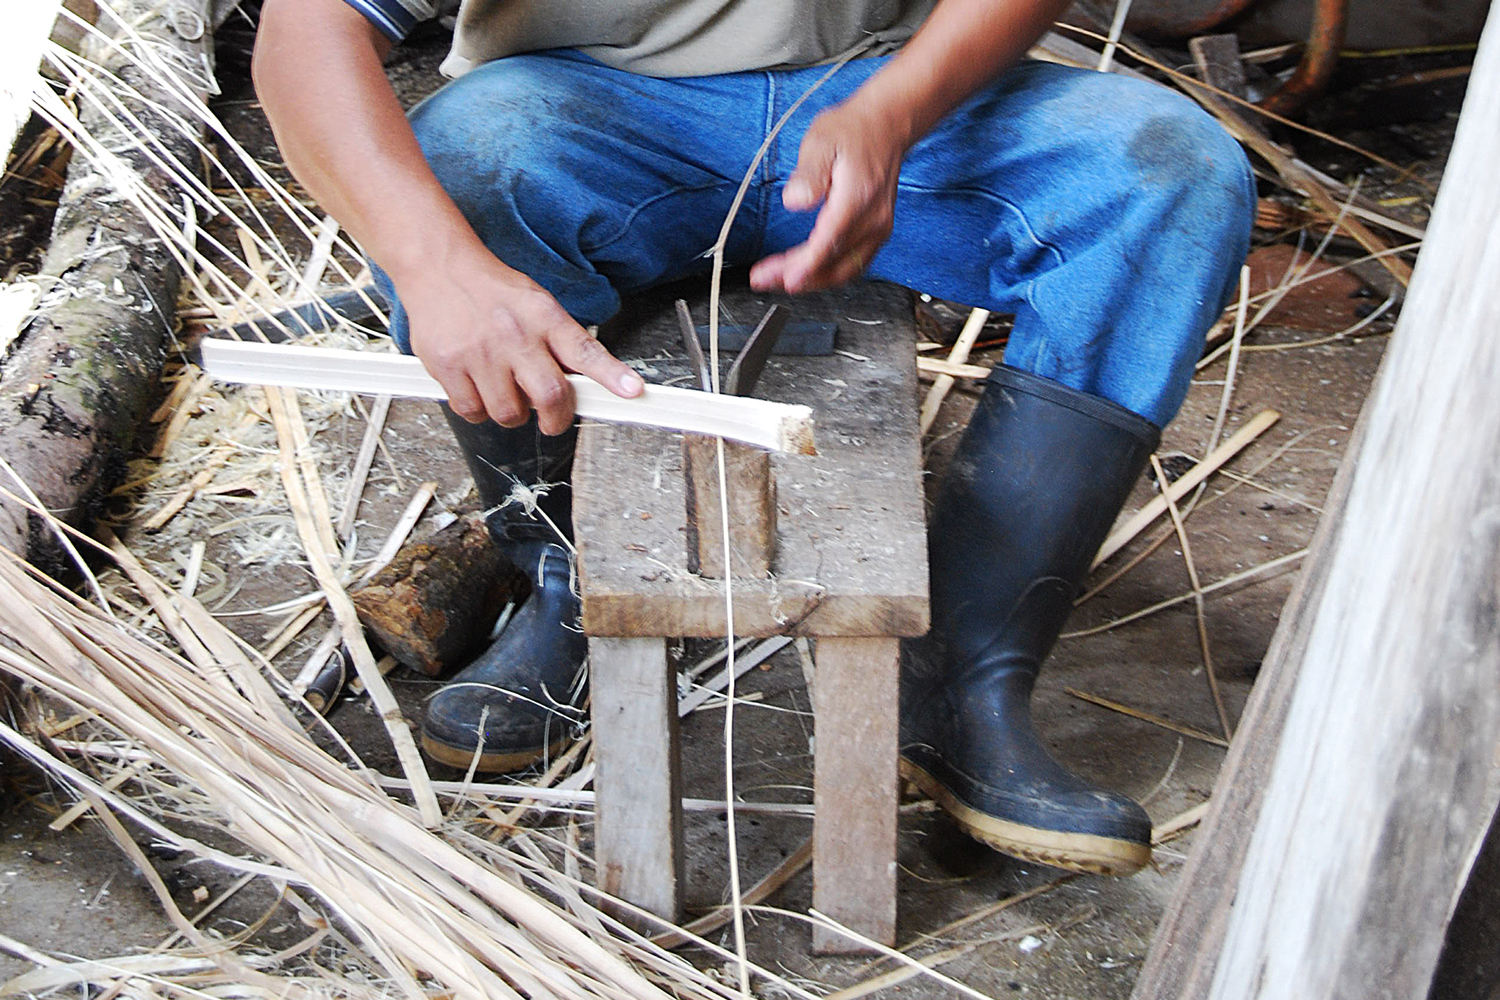 Preparation of bamboo strips